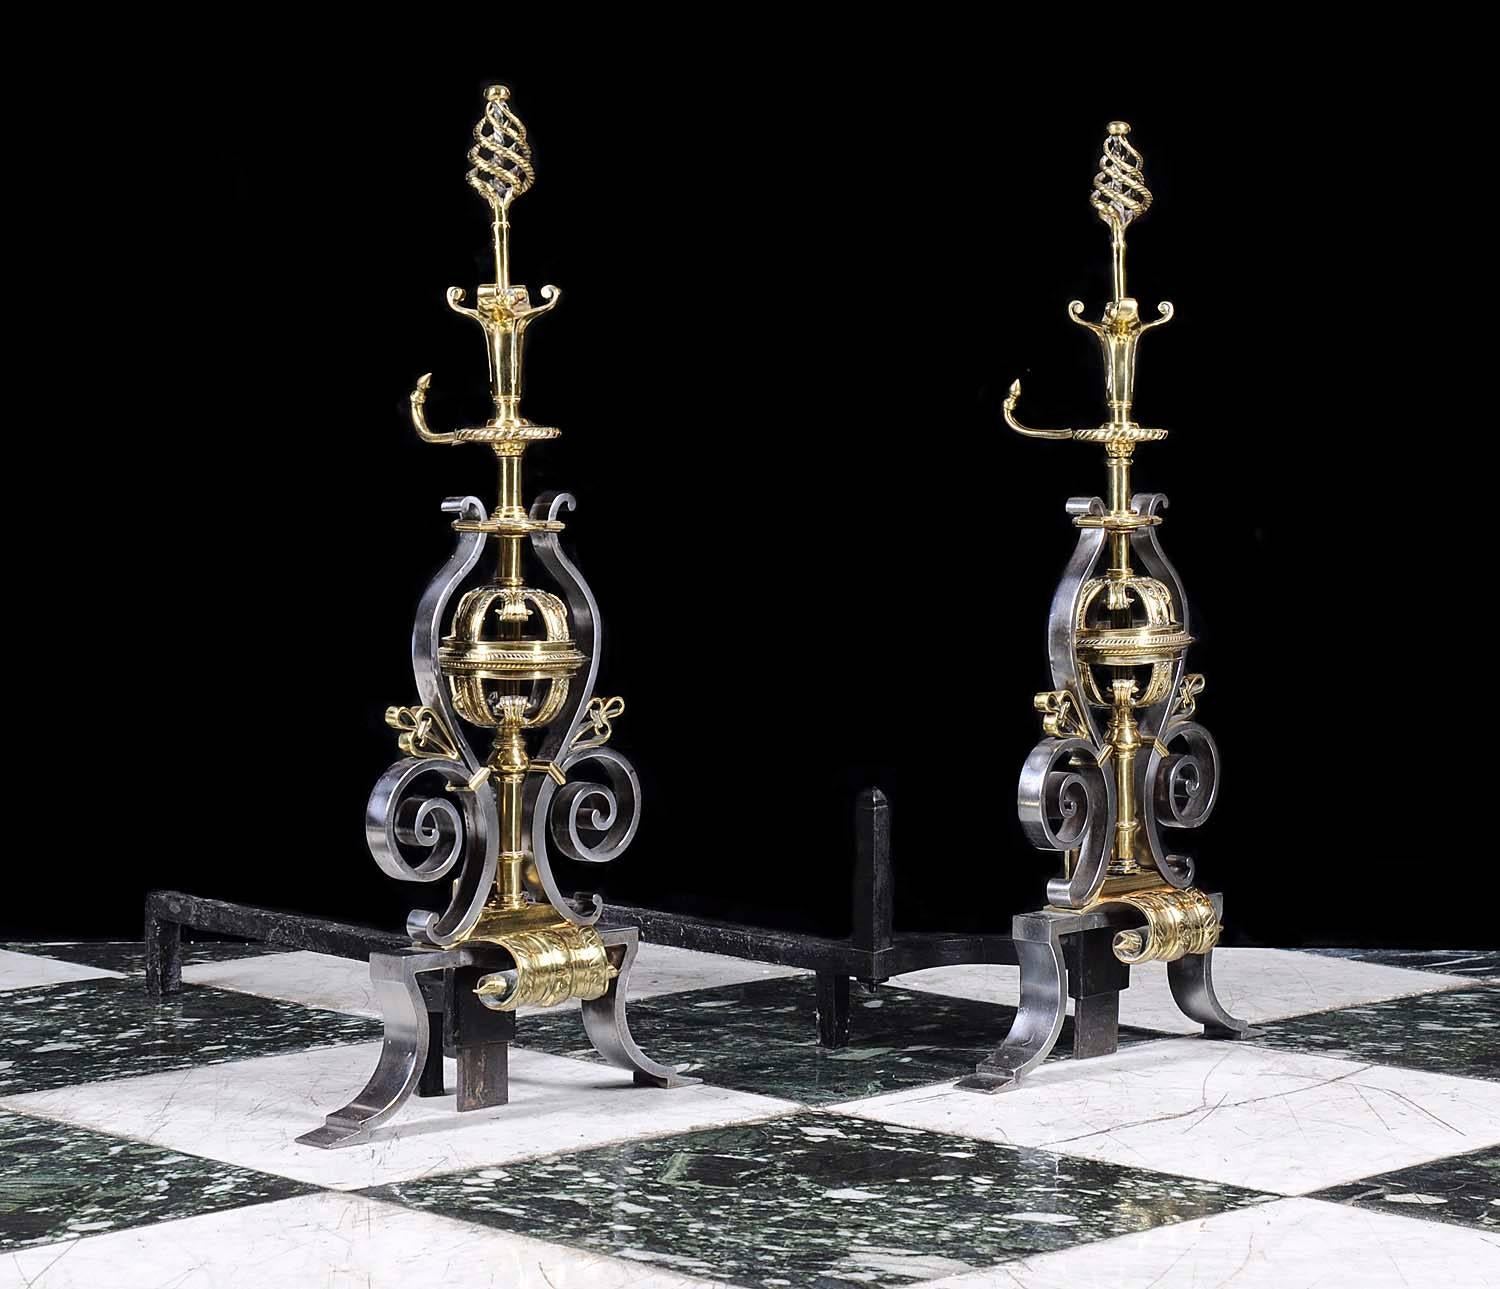 A pair of 19th century polished steel and brass andirons with spiral finials on turned columns hung with central pierced globes within scrolled decoration supported on pairs of splayed feet,

English, late 19th century.

(Price and vat in EU